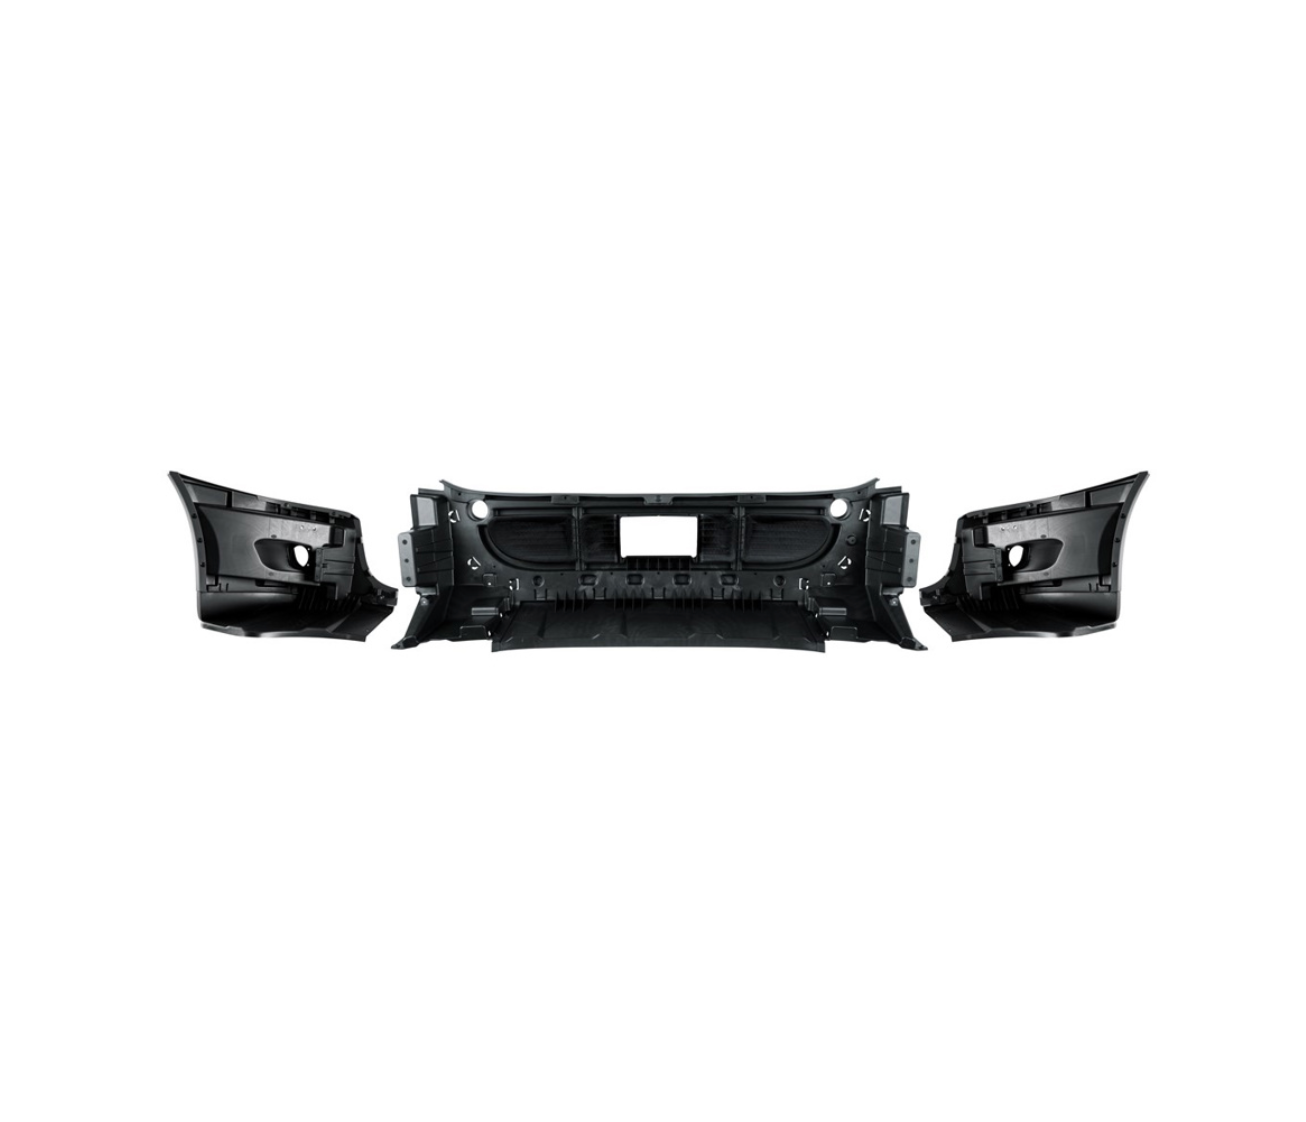 Complete 3-Piece Plastic Front Bumper Set With Fog Light Hole For 2008-2017 Freightliner Cascadia